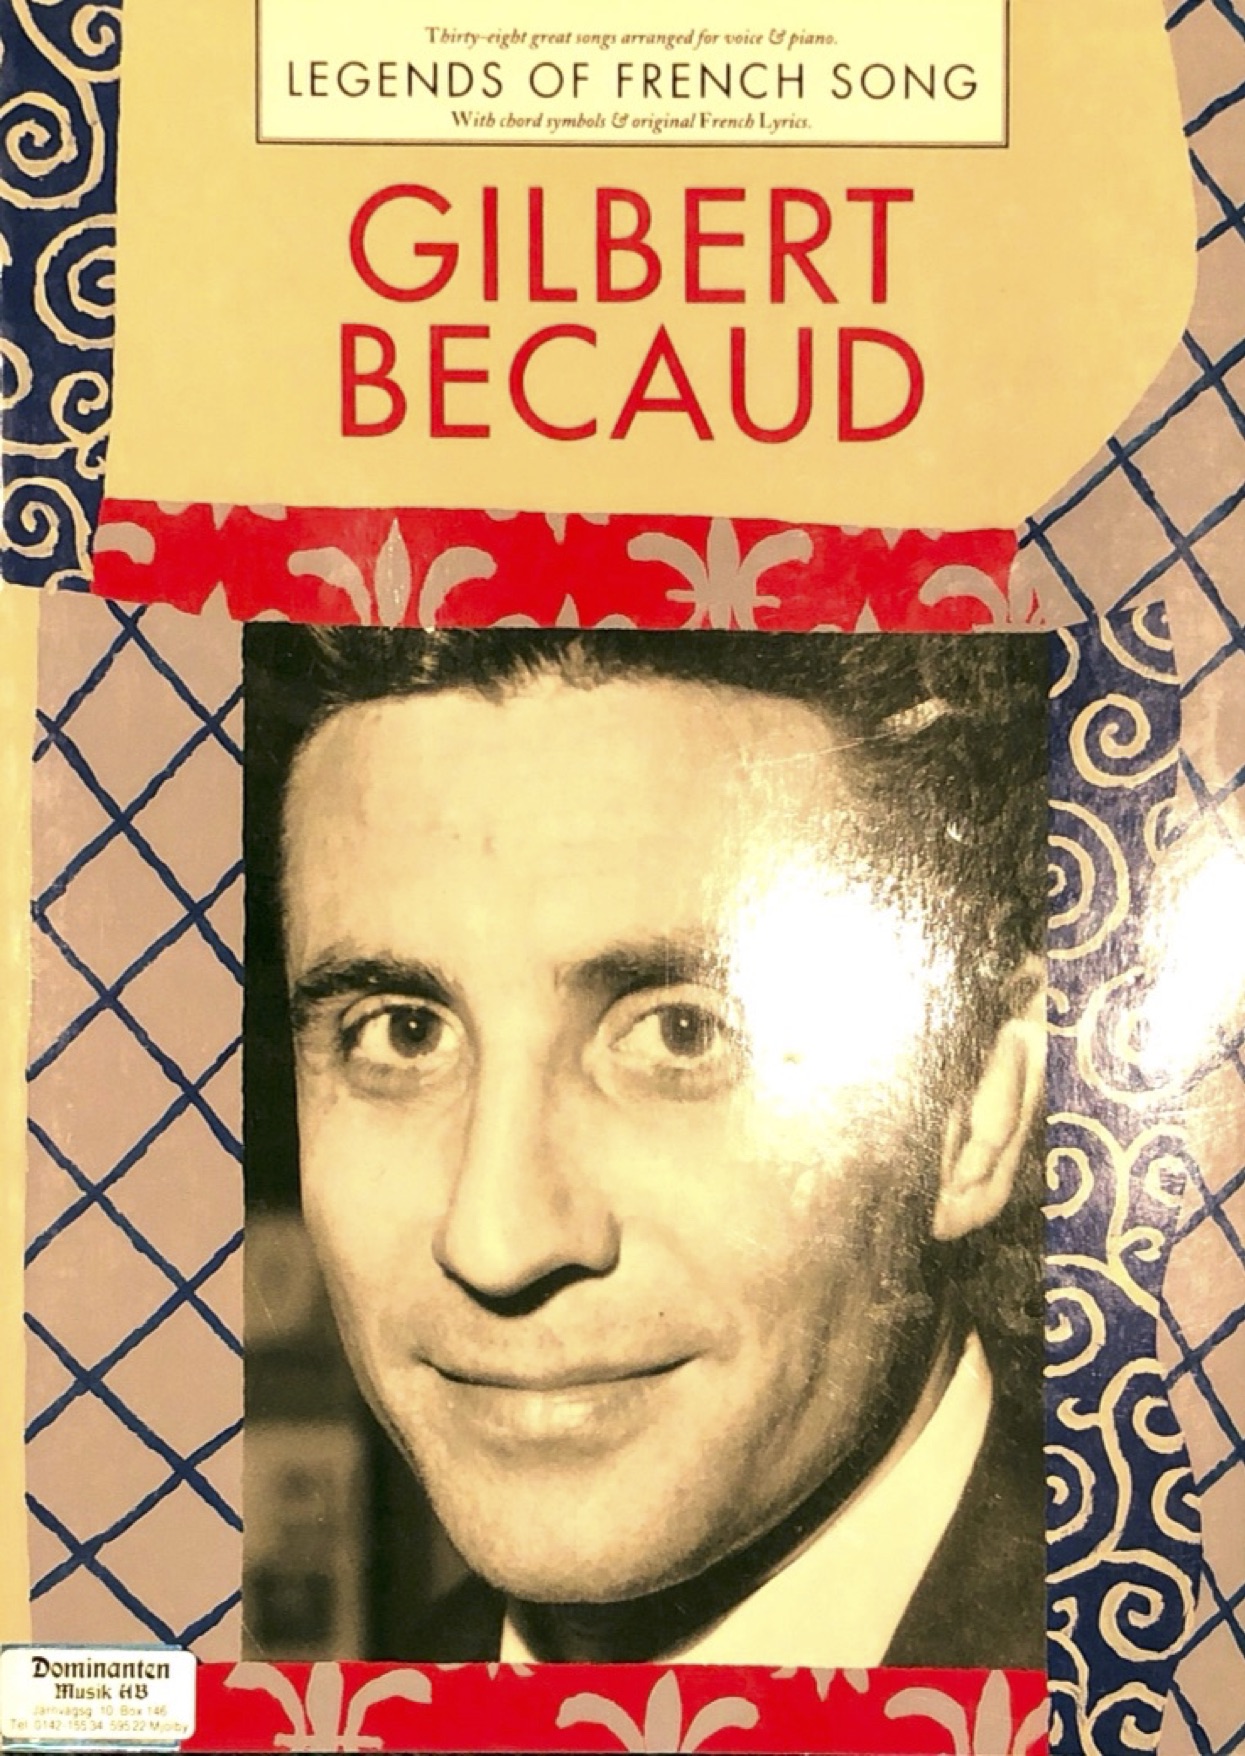 GILBERT BECAUD: LEGENDS OF FRENCH SONG